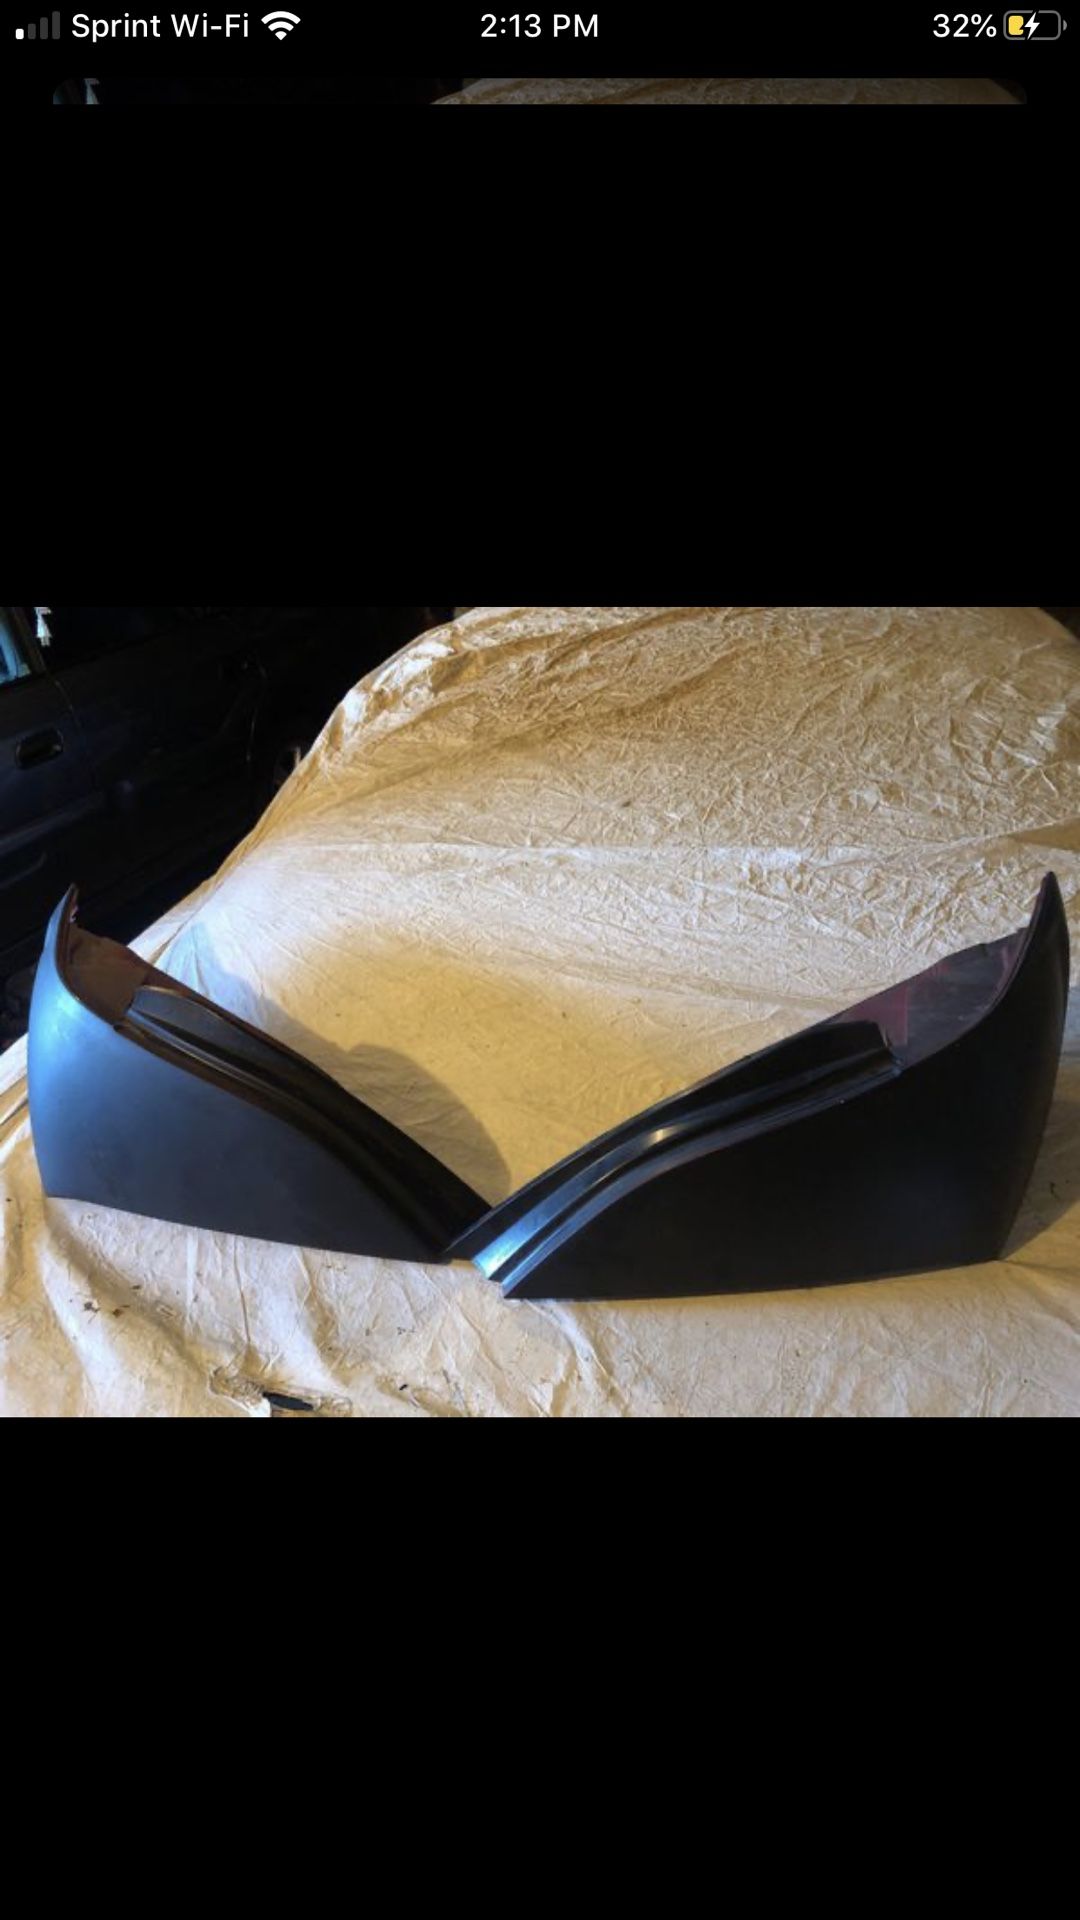 2011 Genesis Coupe Tail Lights.